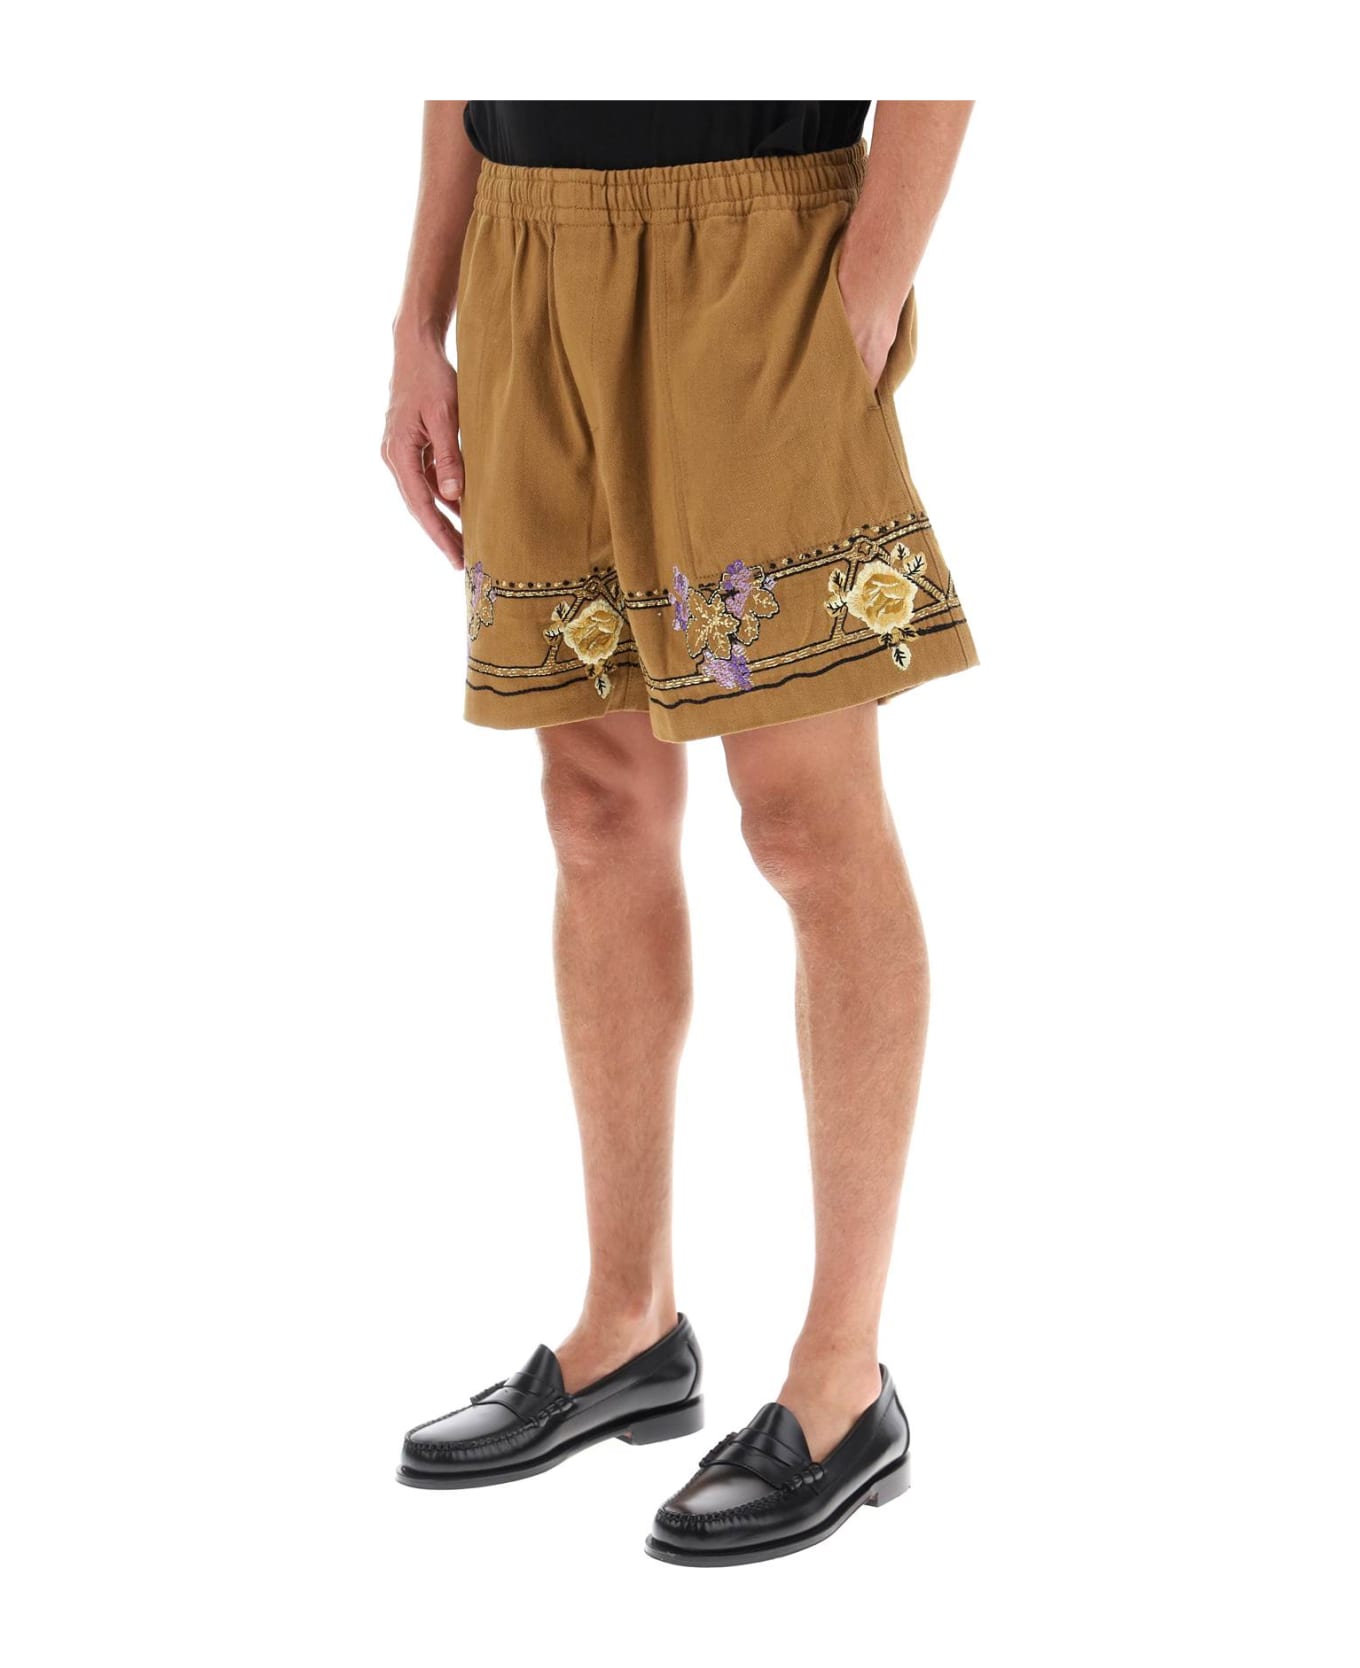 Bode Autumn Royal Shorts With Floral Embroideries - BROWN MULTI (Brown) ショートパンツ